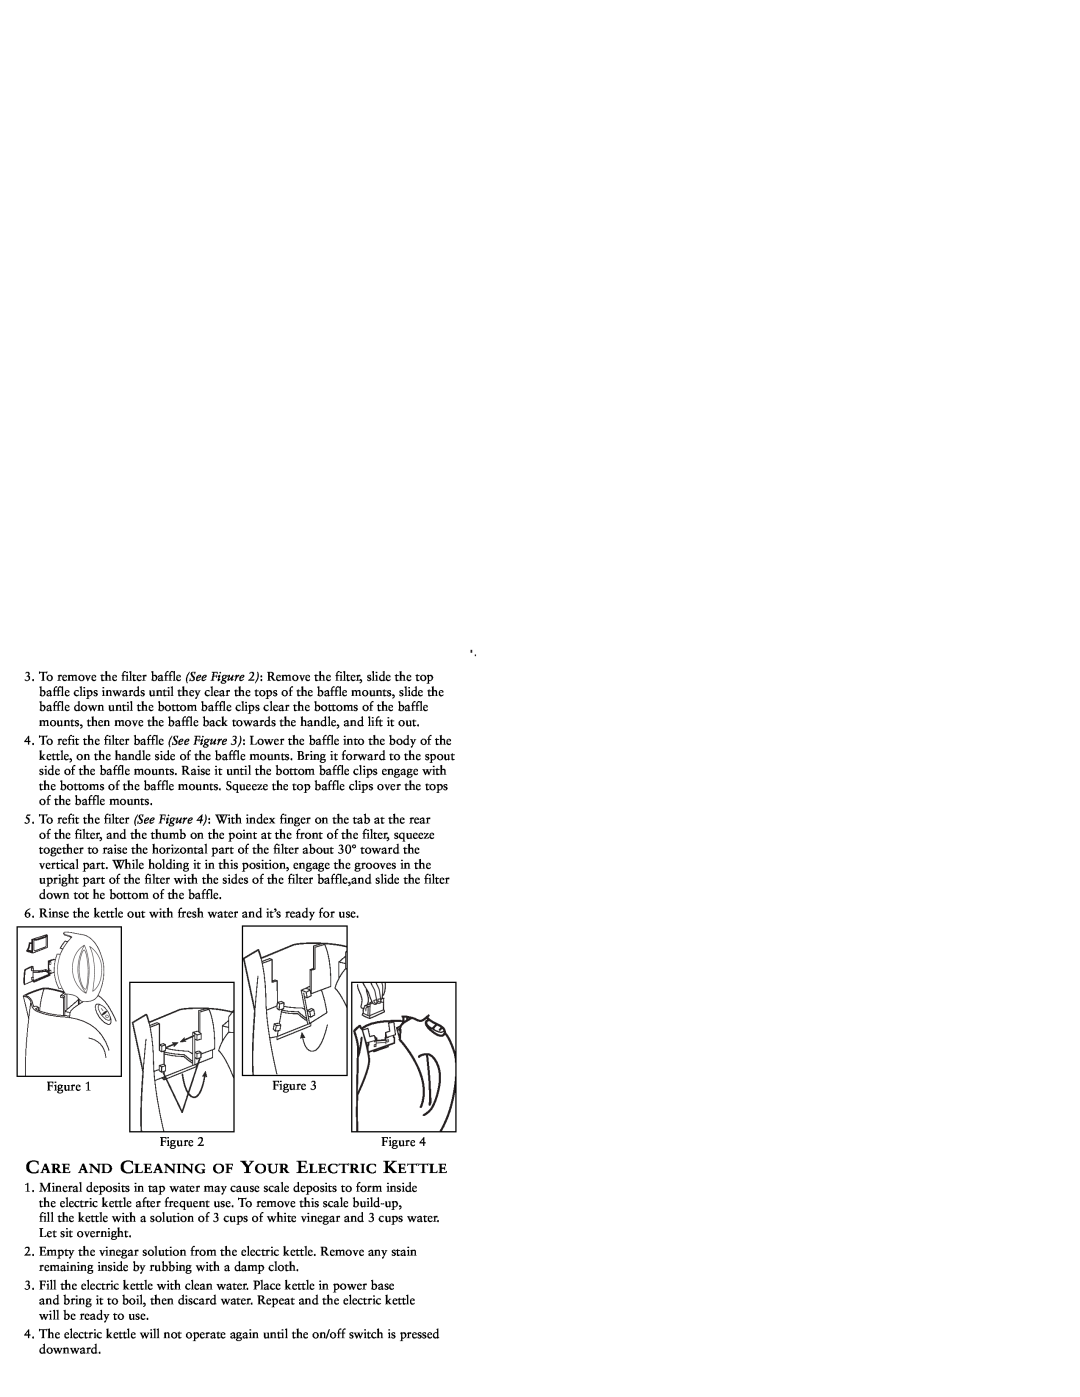 Sunbeam KJX17CL user manual Care And Cleaning Of Your Electric Kettle 